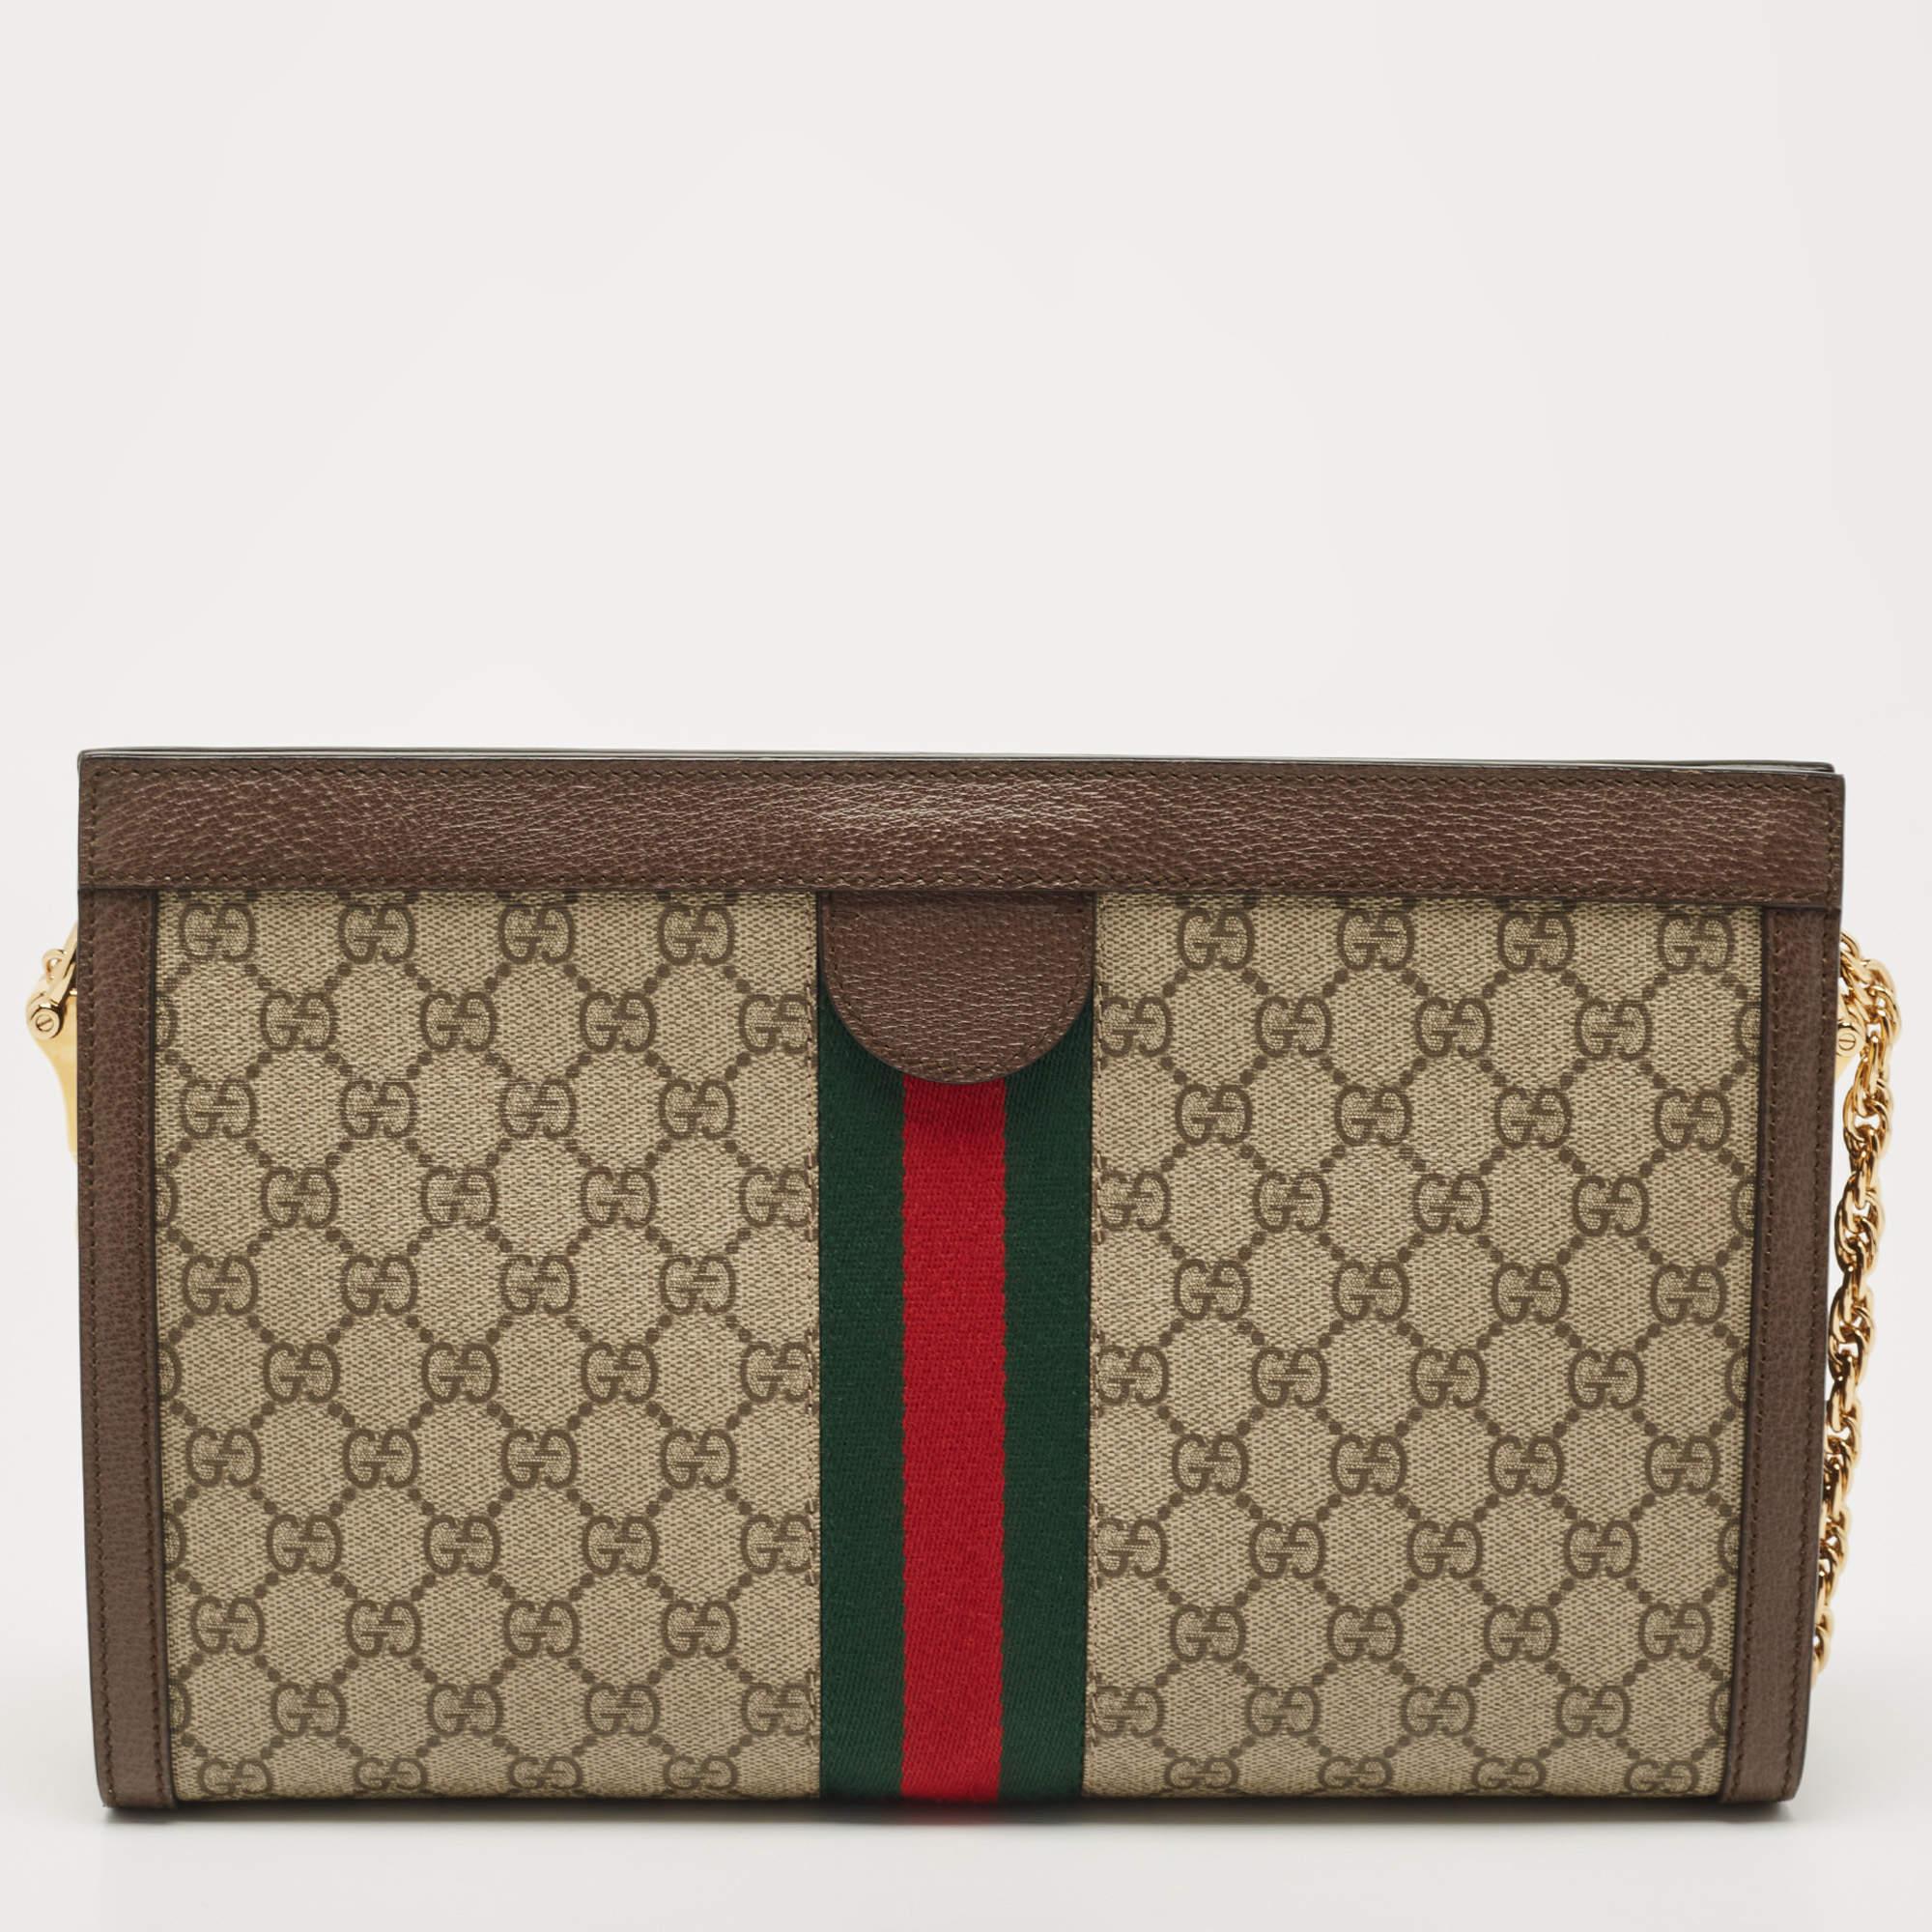 Every creation from Gucci is noteworthy for its timeless charm and versatile design. Created from GG Supreme canvas and leather, this Gucci Ophidia bag is imbued with heritage details. The Web stripe detailing and the interlocked 'GG' motif on the